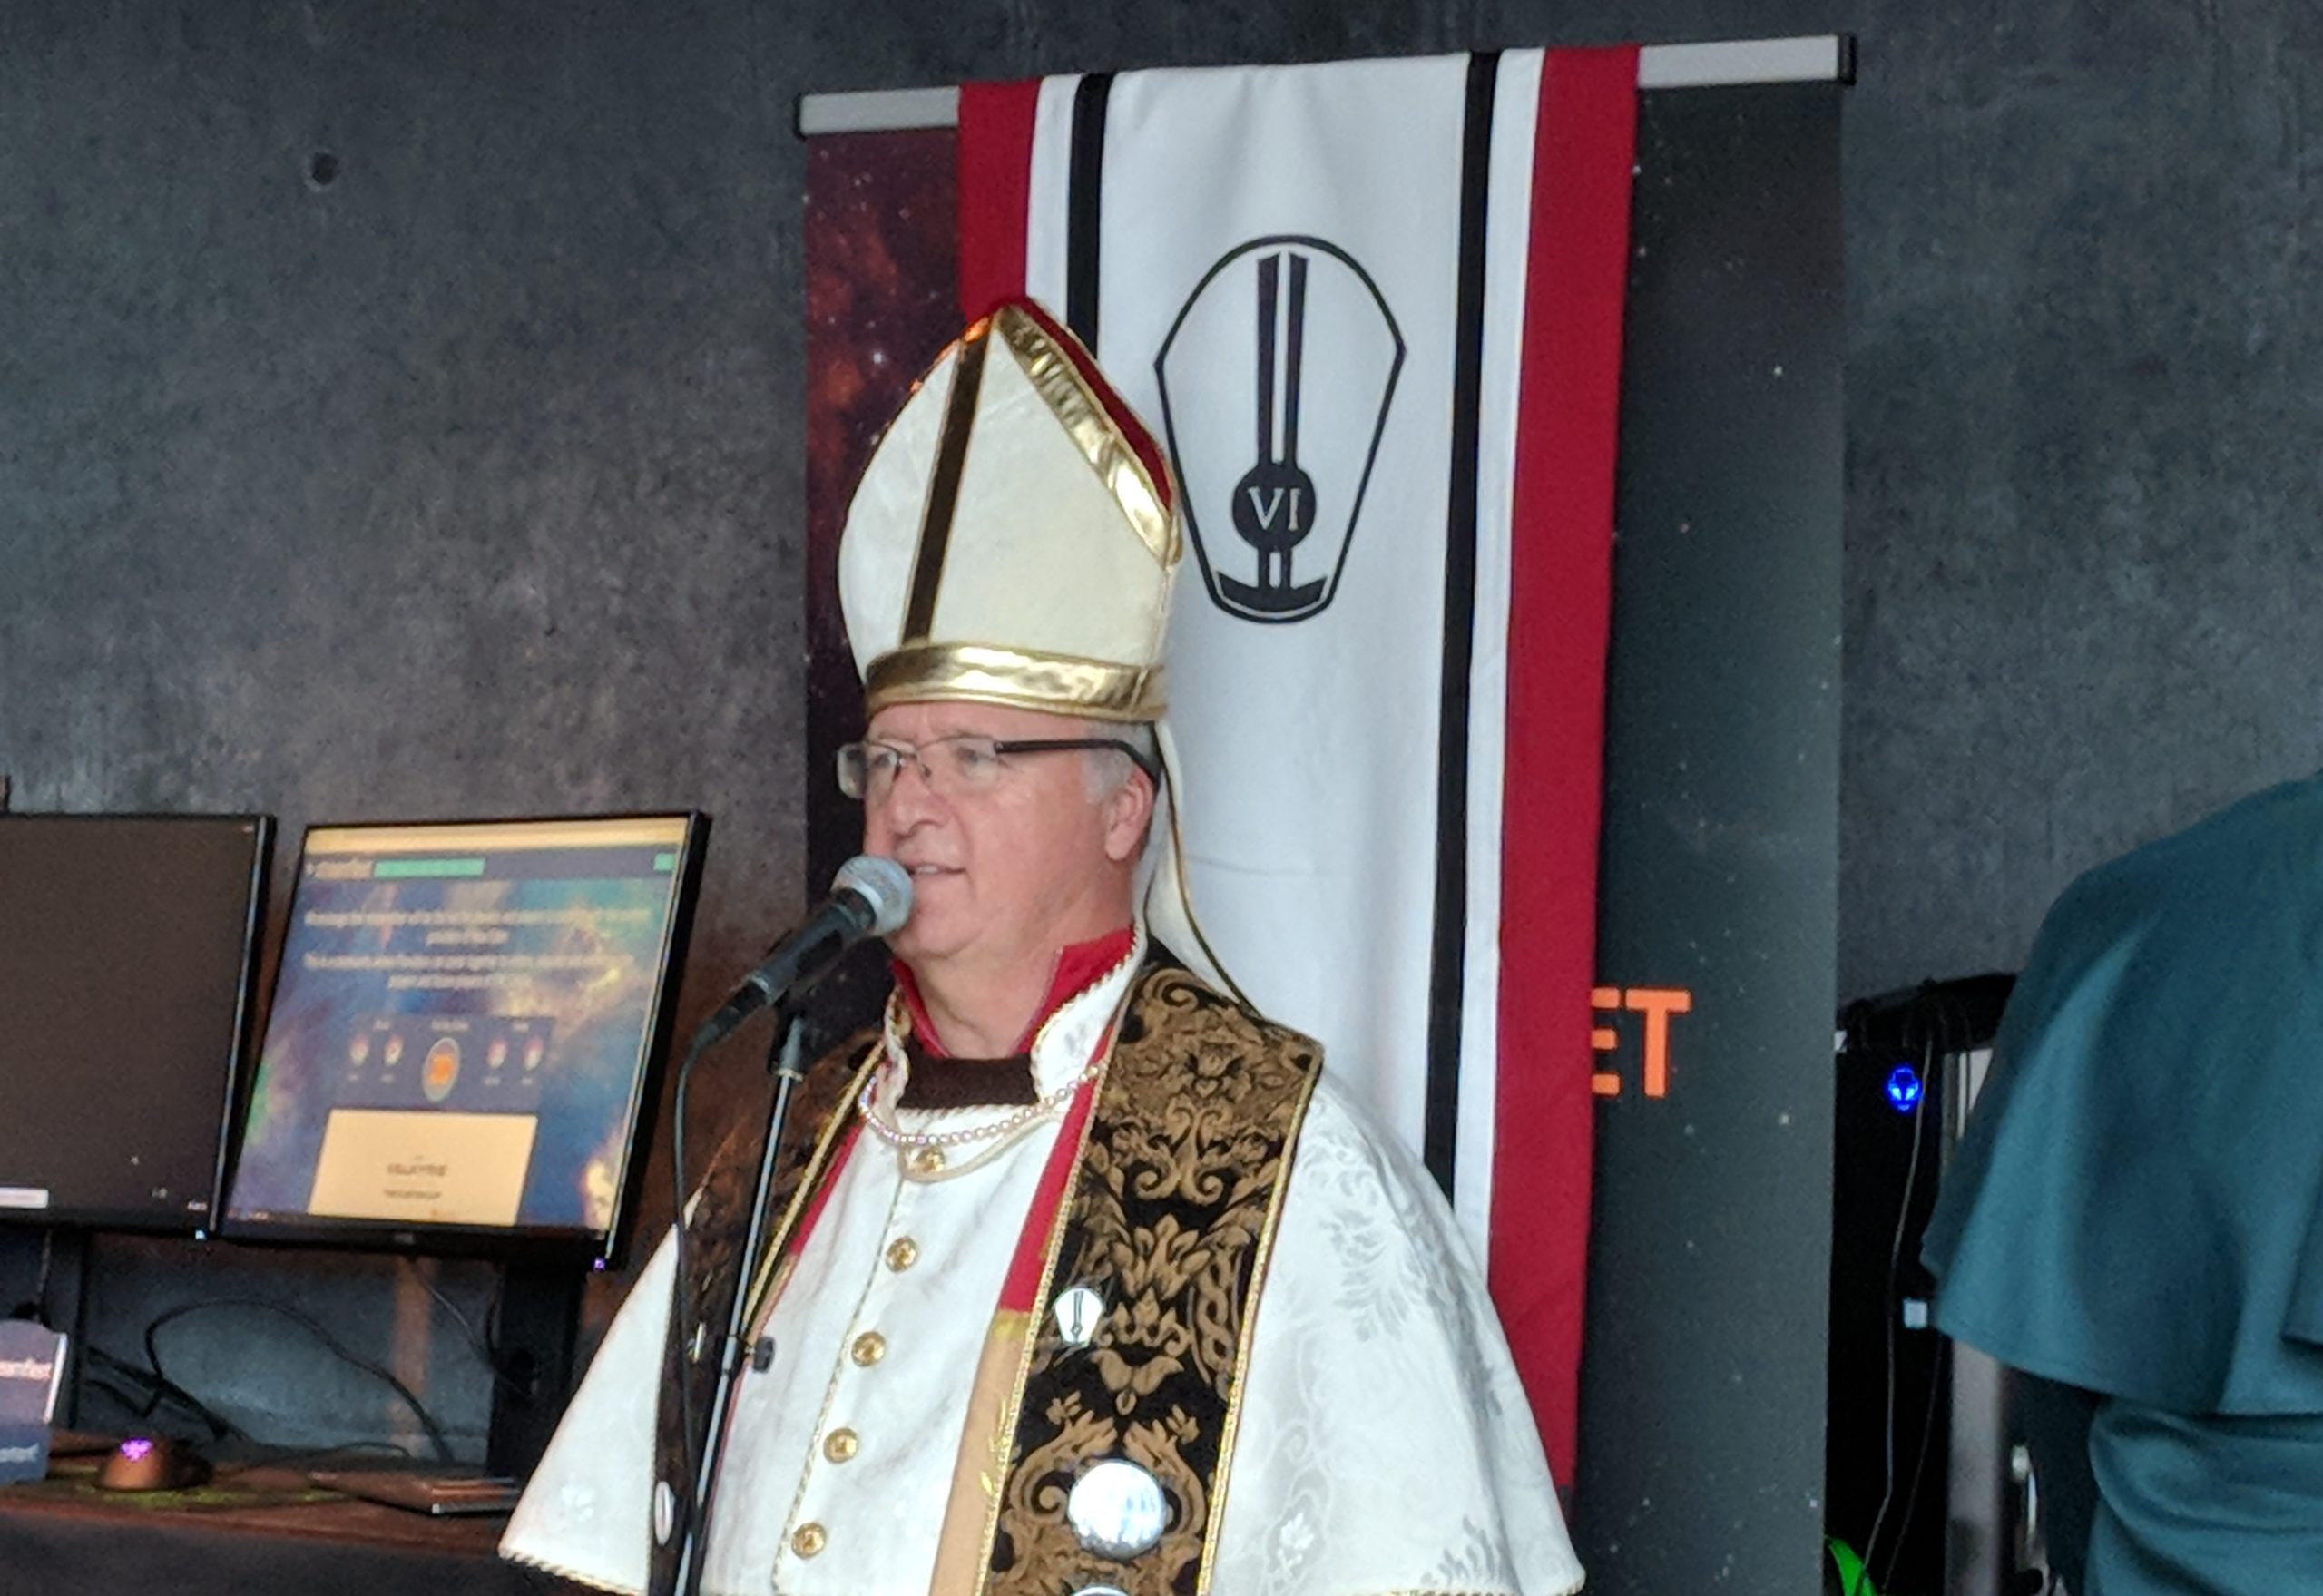 ‘Space Pope’ Officiates Wedding At EVE Fanfest